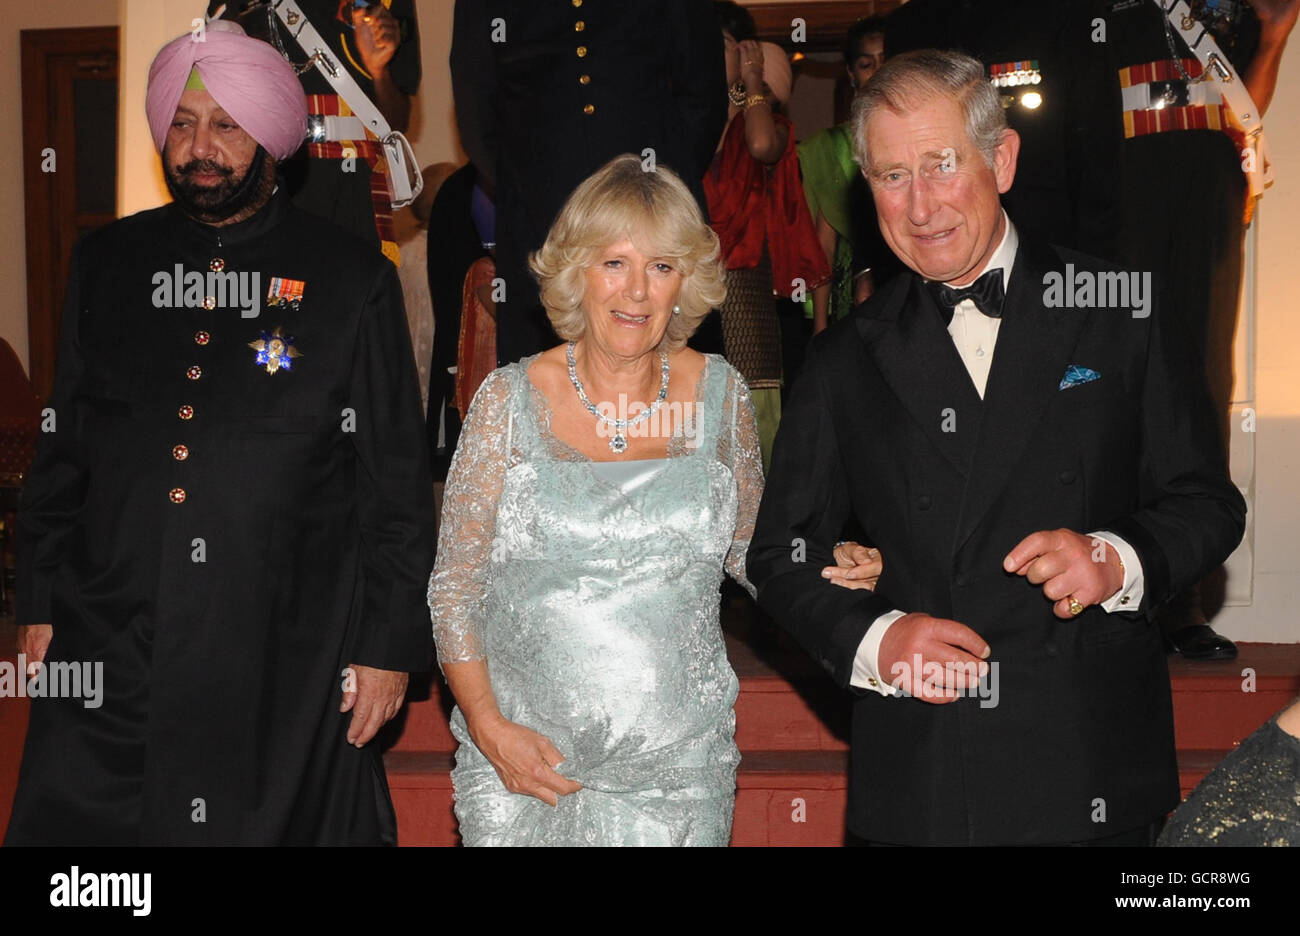 The Prince of Wales and Duchess of Cornwall arrive with Maharaja of Patiala, Captain Amarinder Singh (left), at the Maharaja's palace in Patialia, India. Stock Photo